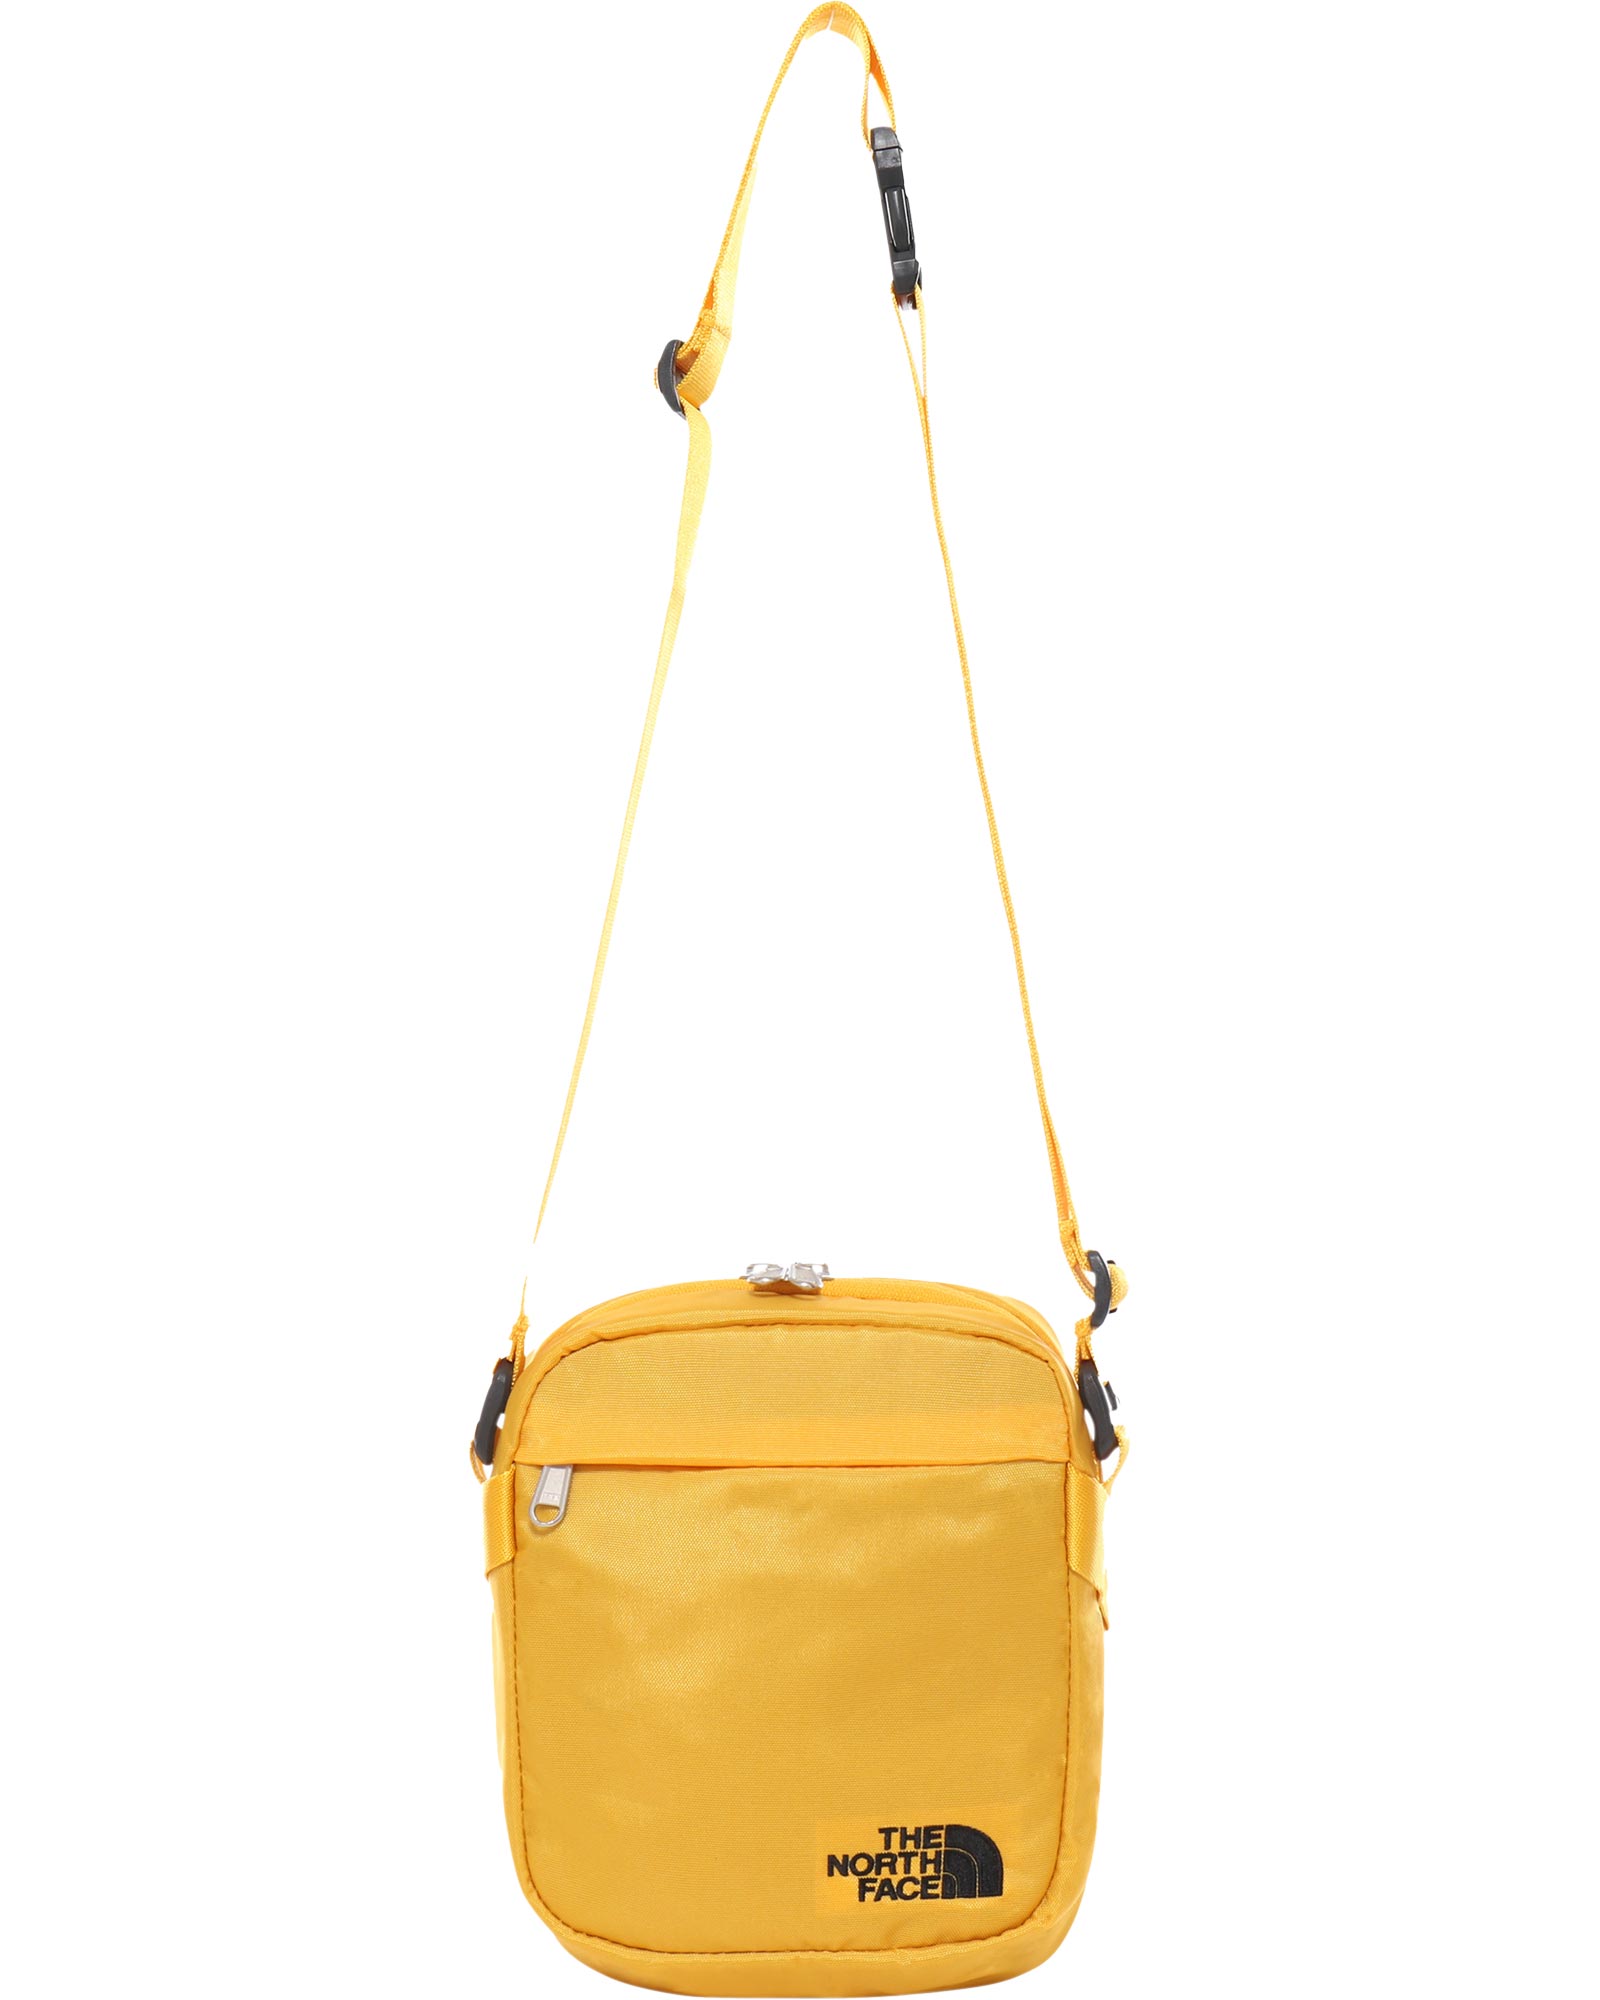 The North Face Convertible Shoulder Bag - Summit Gold/TNF Black